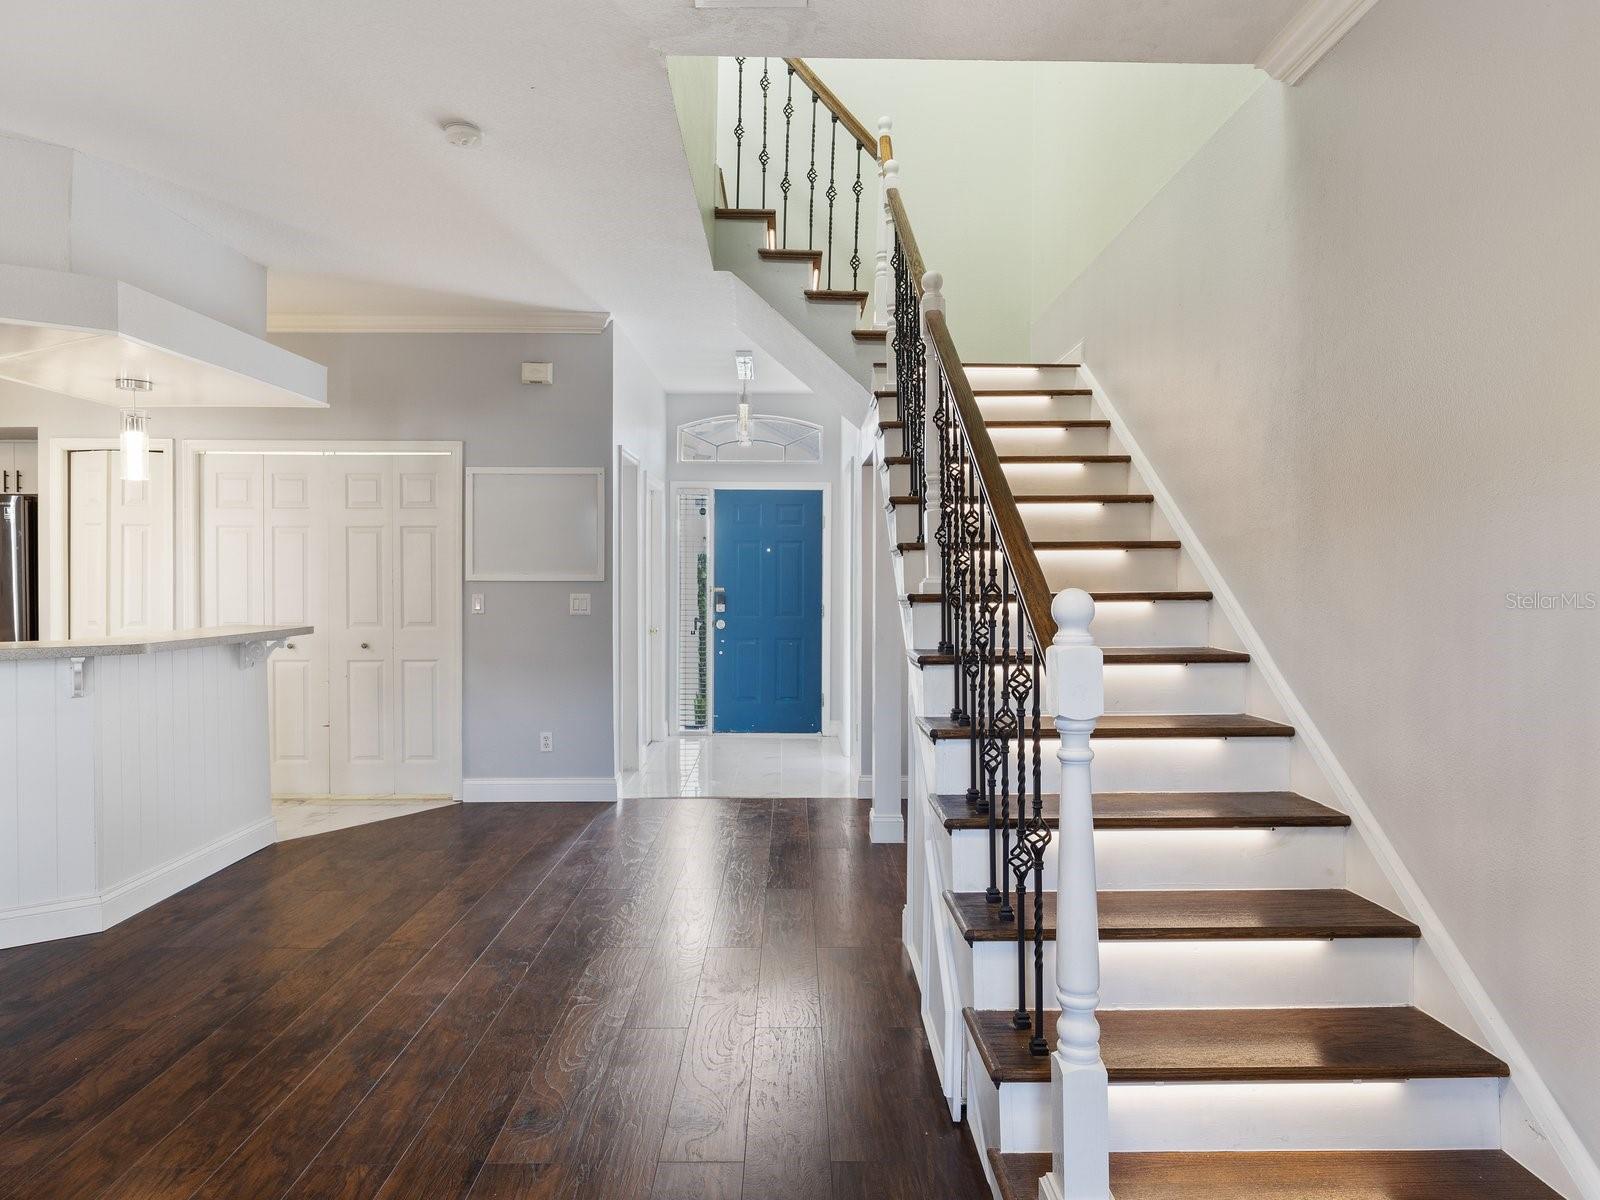 More living space provided due to staircase remodel